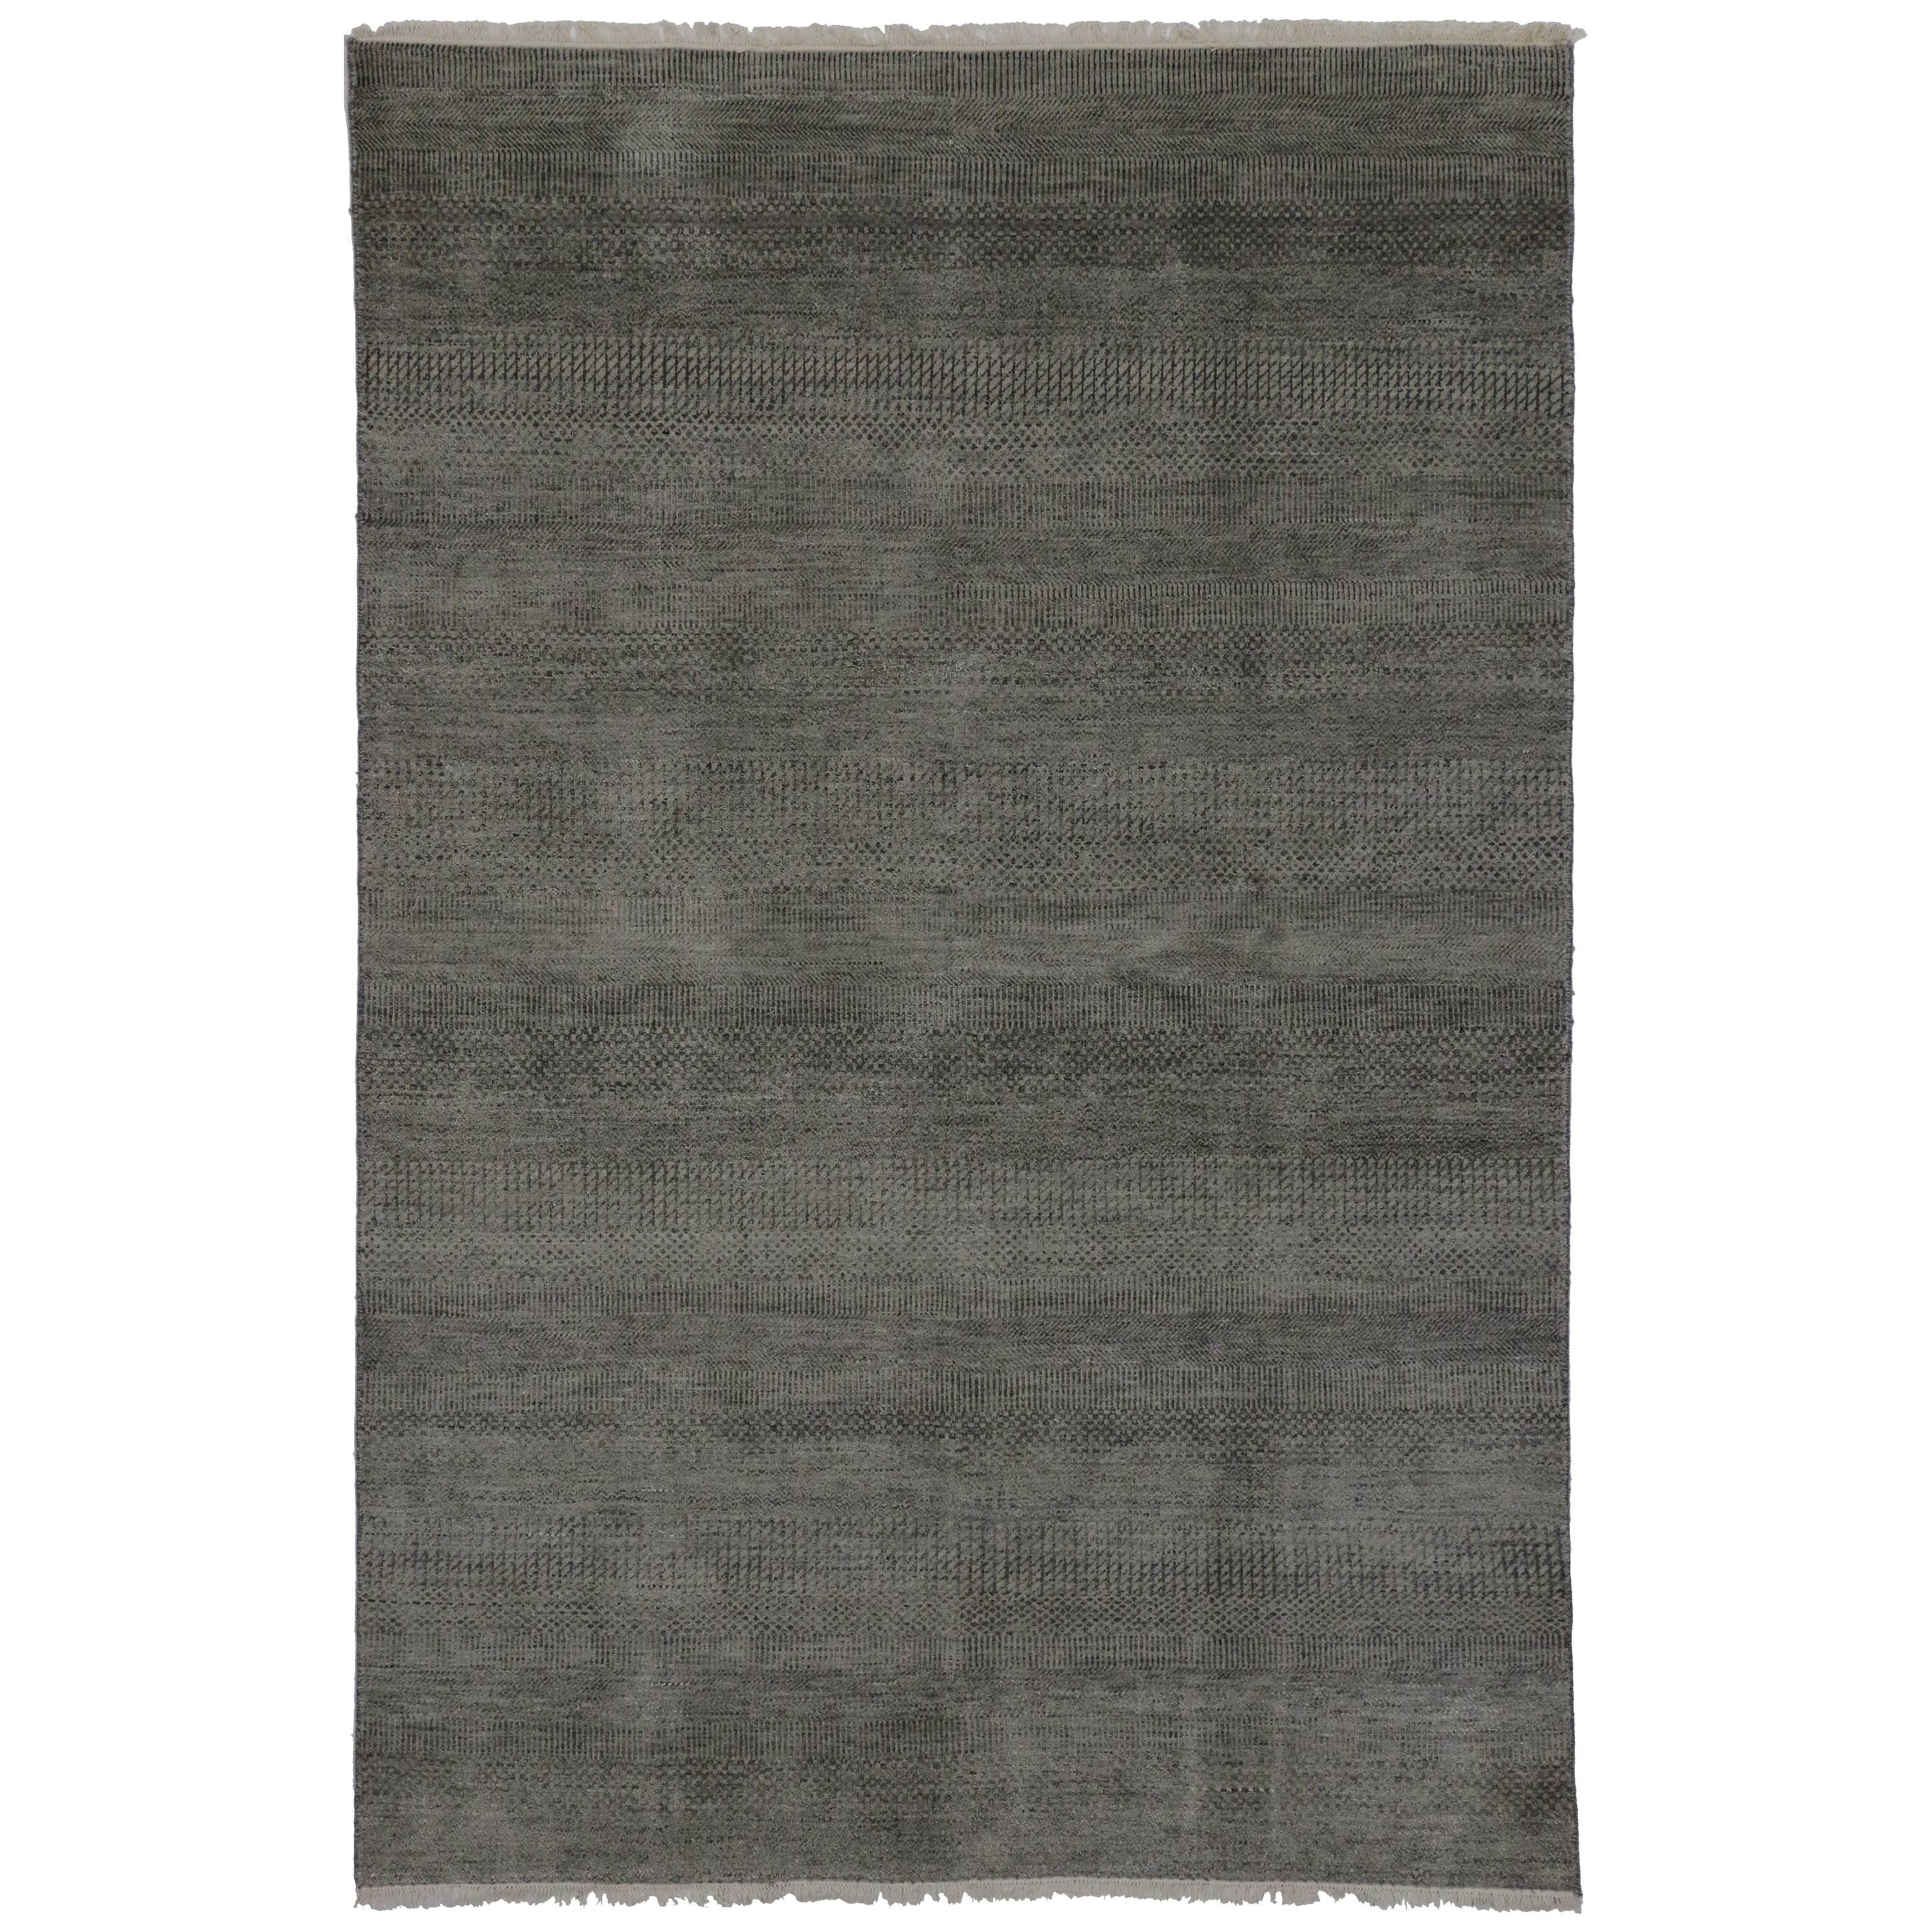 New Contemporary Transitional Gray Area Rug with Minimalist International Style  For Sale